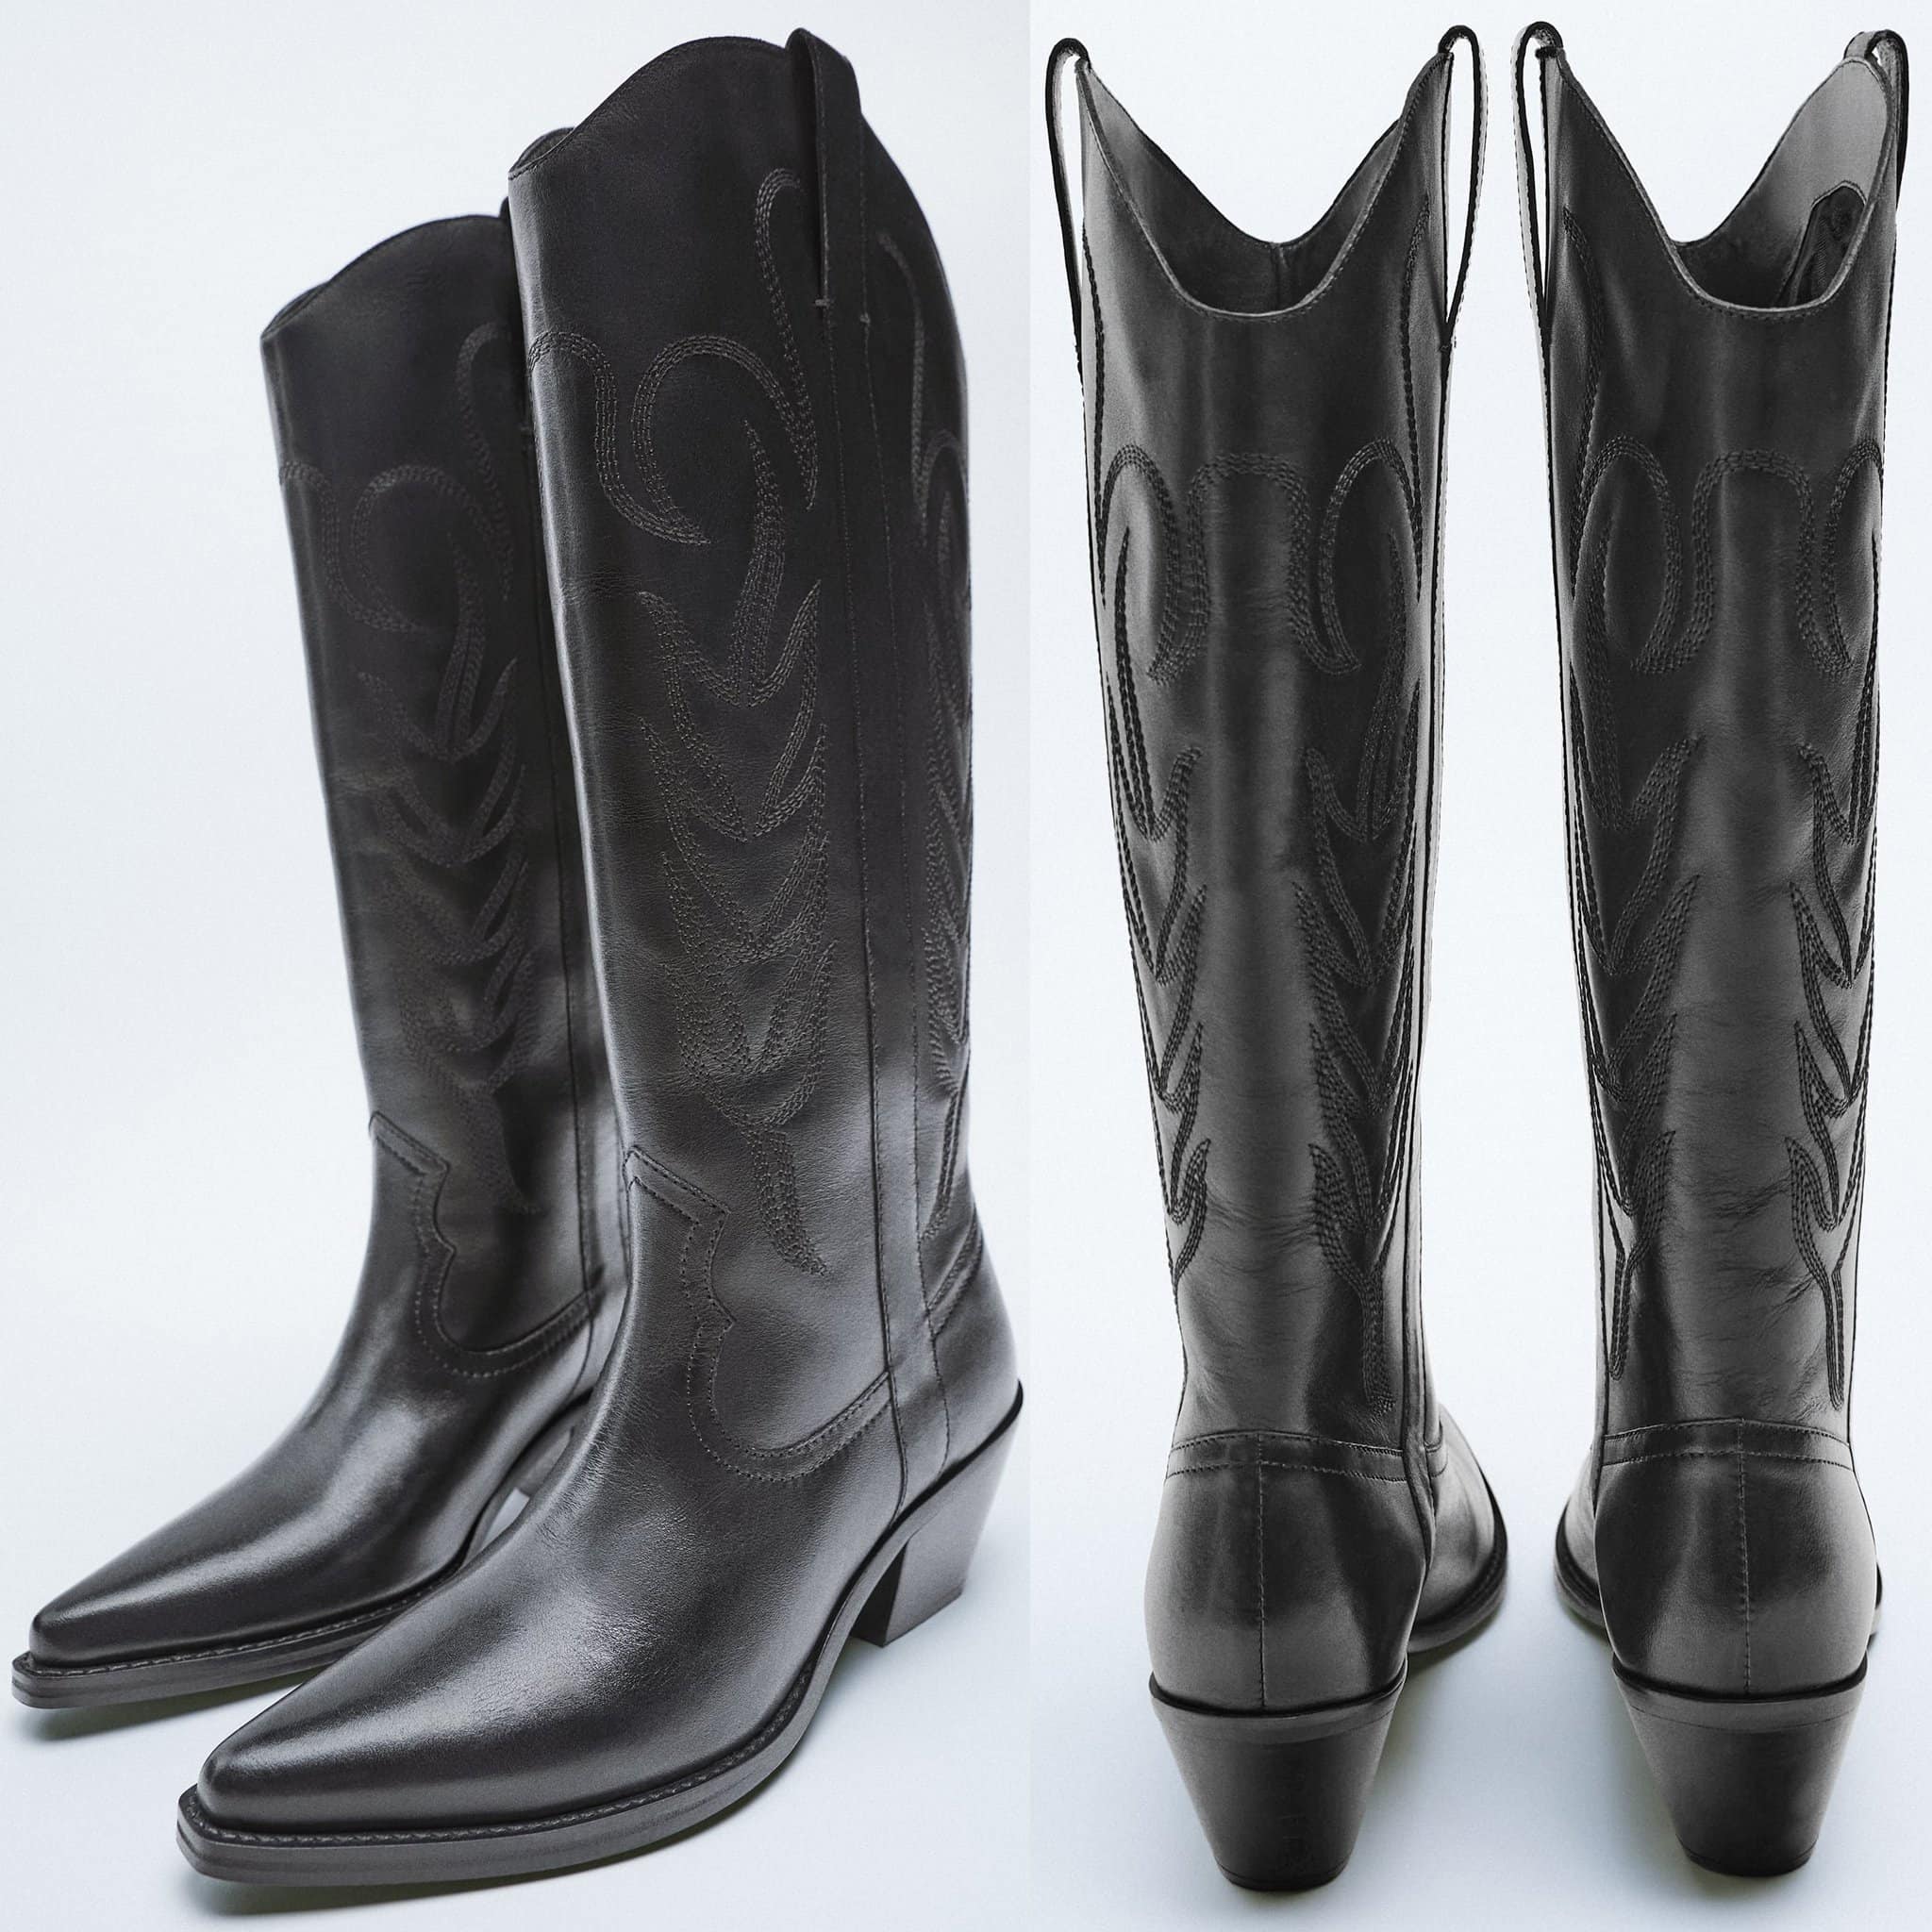 Zara's cowboy boots feature a classic design with tonal western stitching and side pull tabs